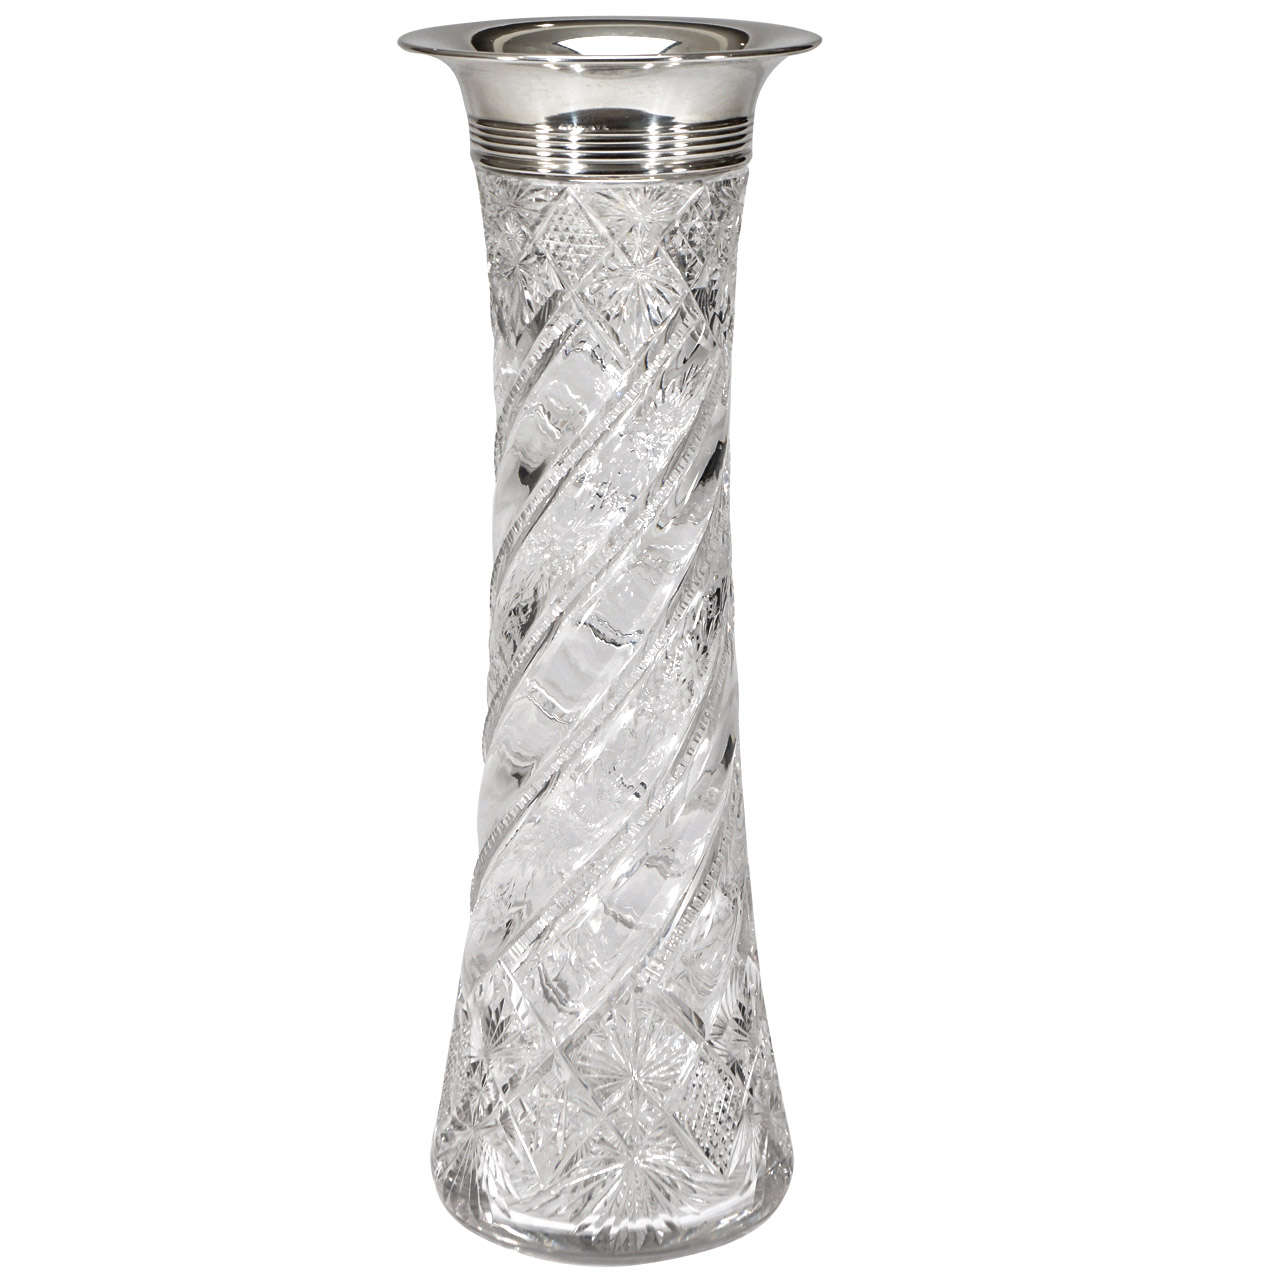 Monumental ABP Crystal Vase with Wheel-Cutting & Sterling Mount For Sale